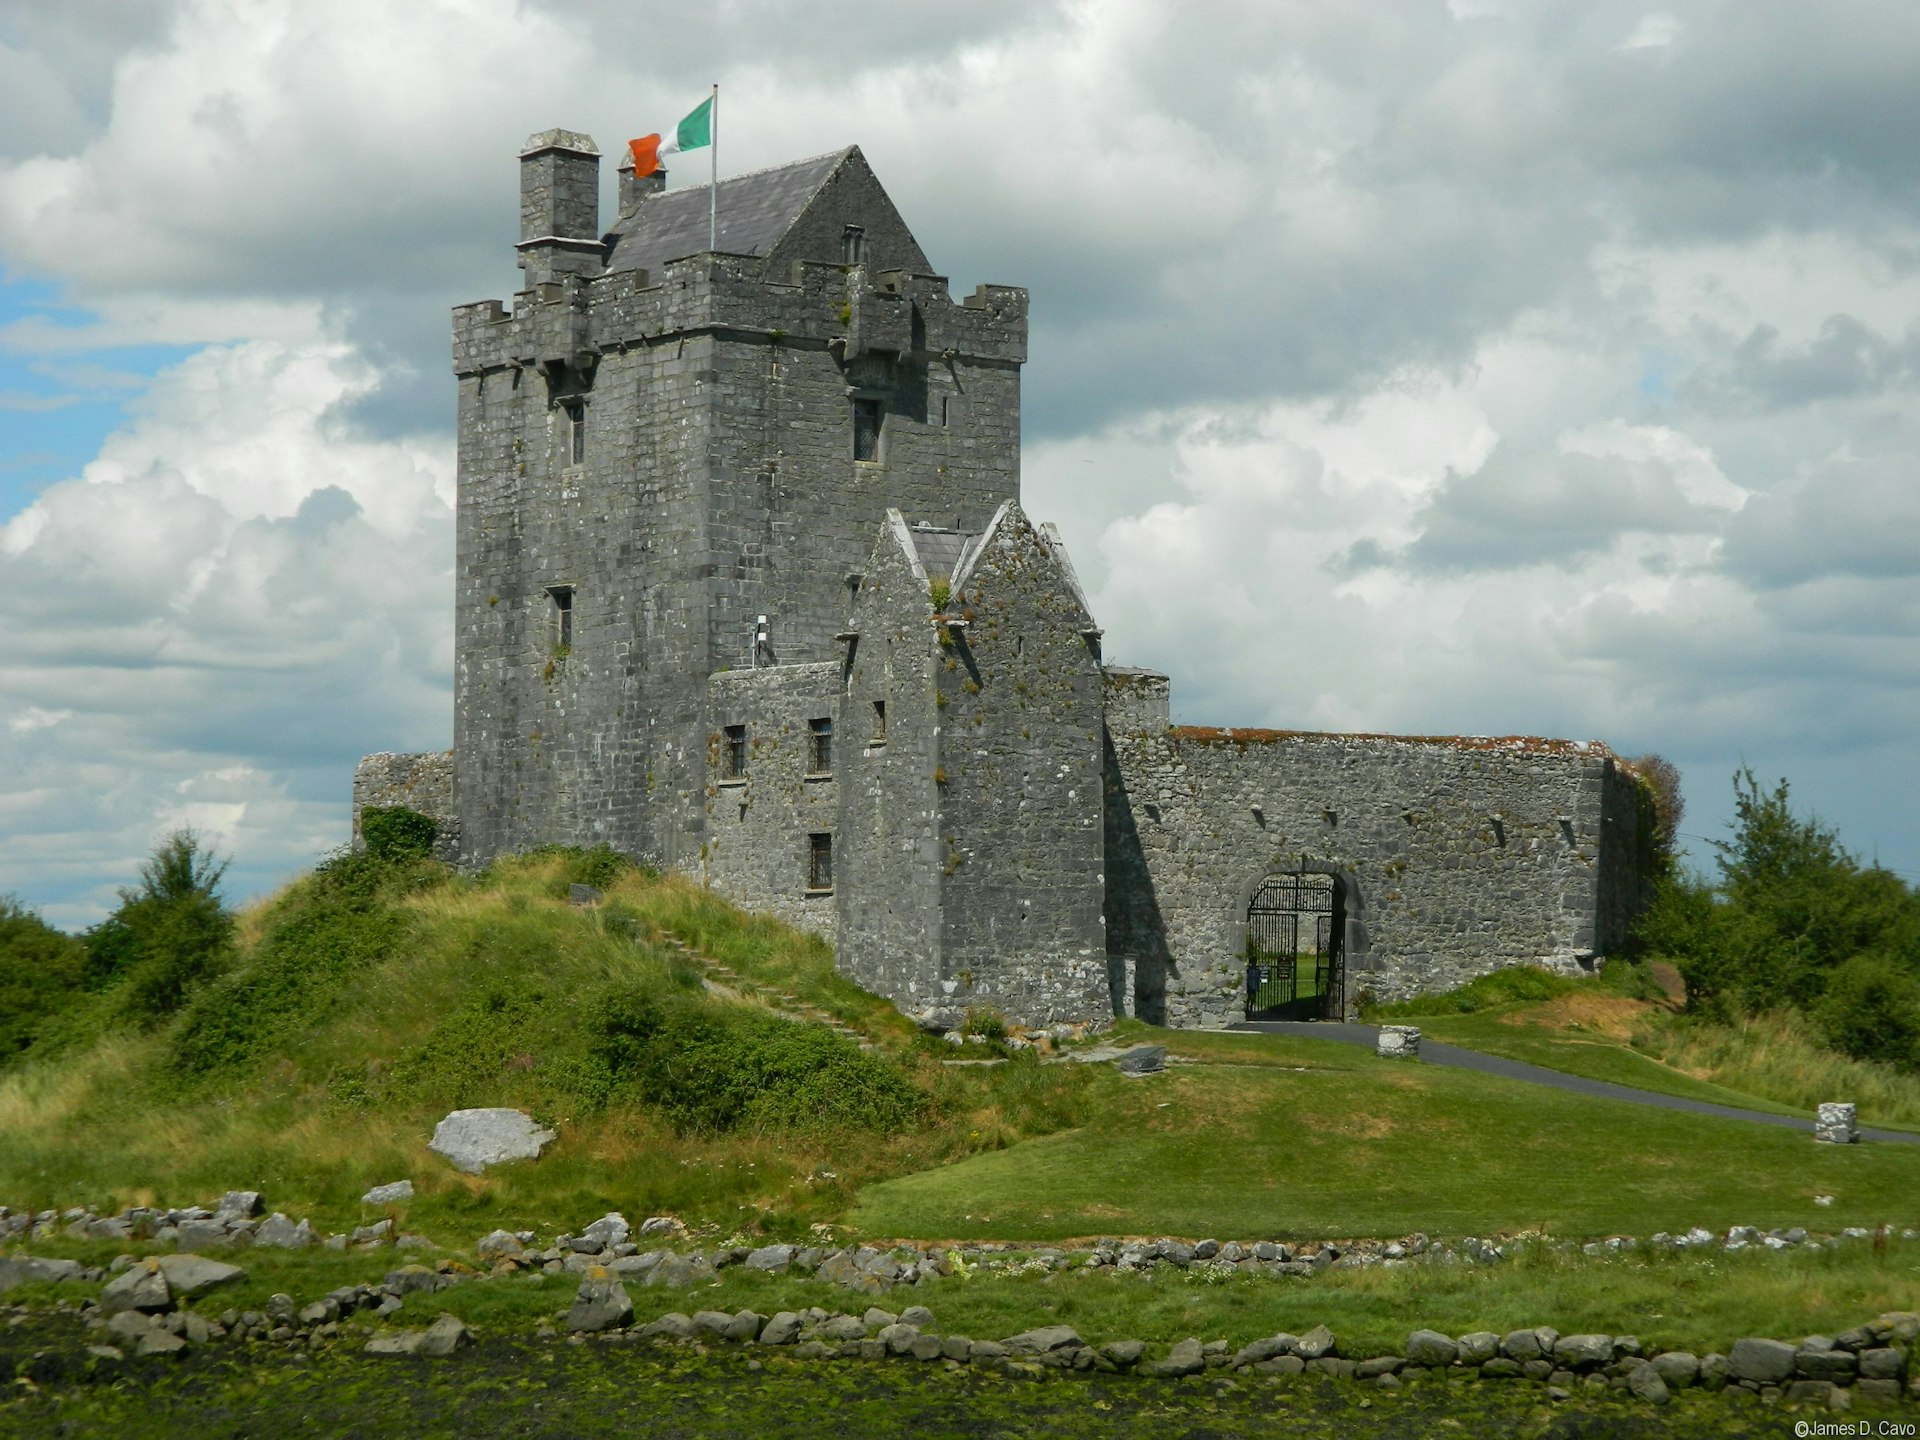 The exterior of Dunguaire Castle in Ireland